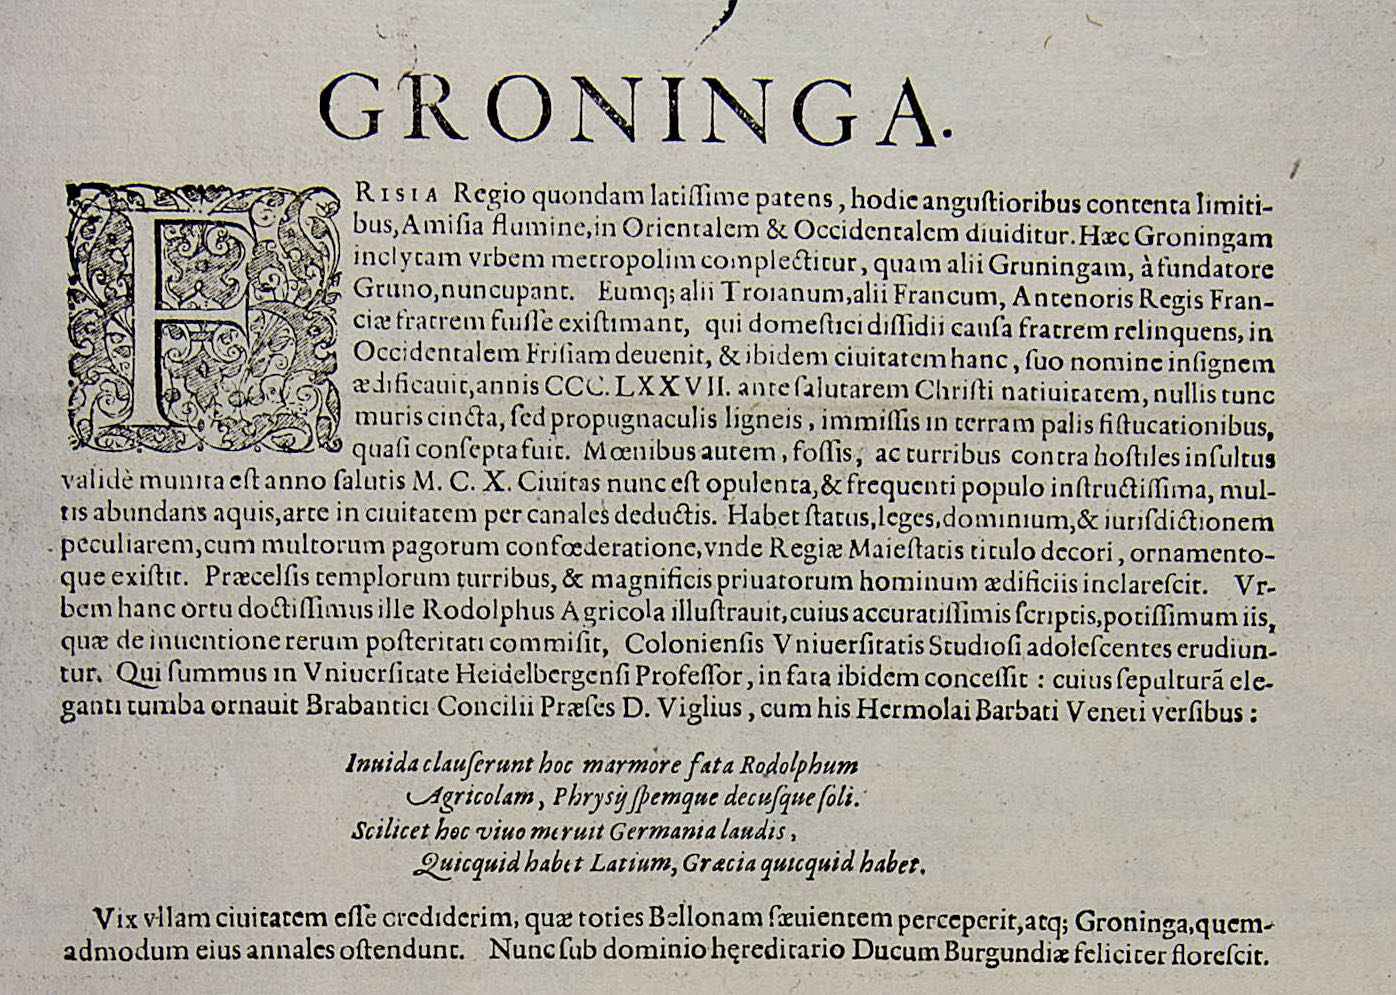 Text accompanying the overview of Groningen from 1576. Agricola is mentioned by name as a jewel in the crown of this city for whom the famous Italian humanist Ermolao Barbaro composed this epitaph: “Jealous fate has locked Rudolph in this marble: Agricola, the hope and pride of Frisia. While he was alive, Germany earned the renown of Lazio and Greece put together.”